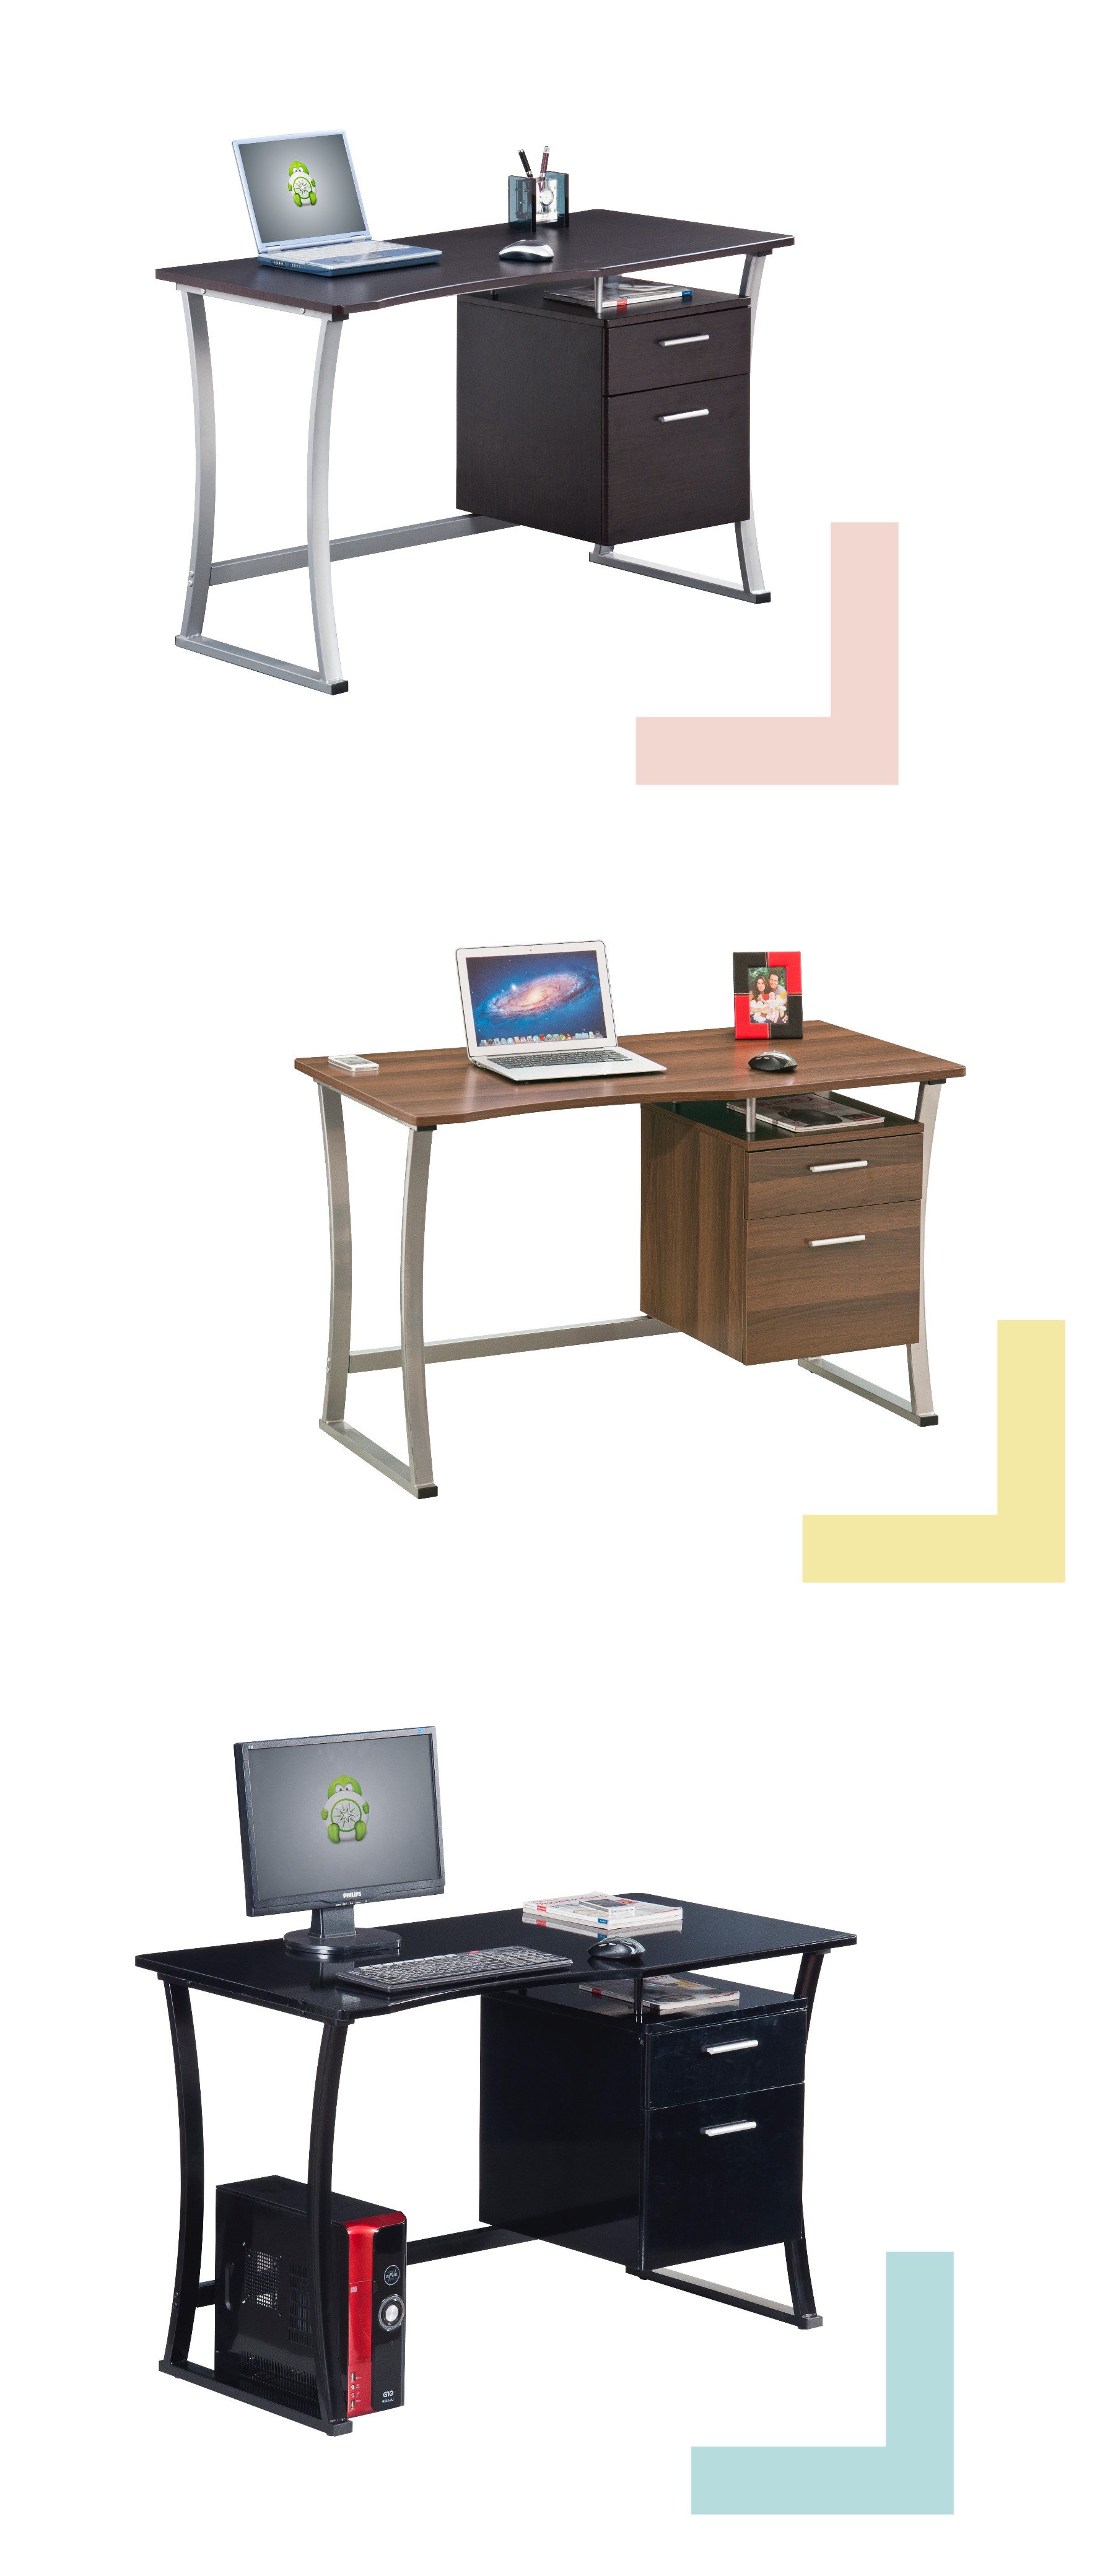 desk for audlts and children over 12 years old